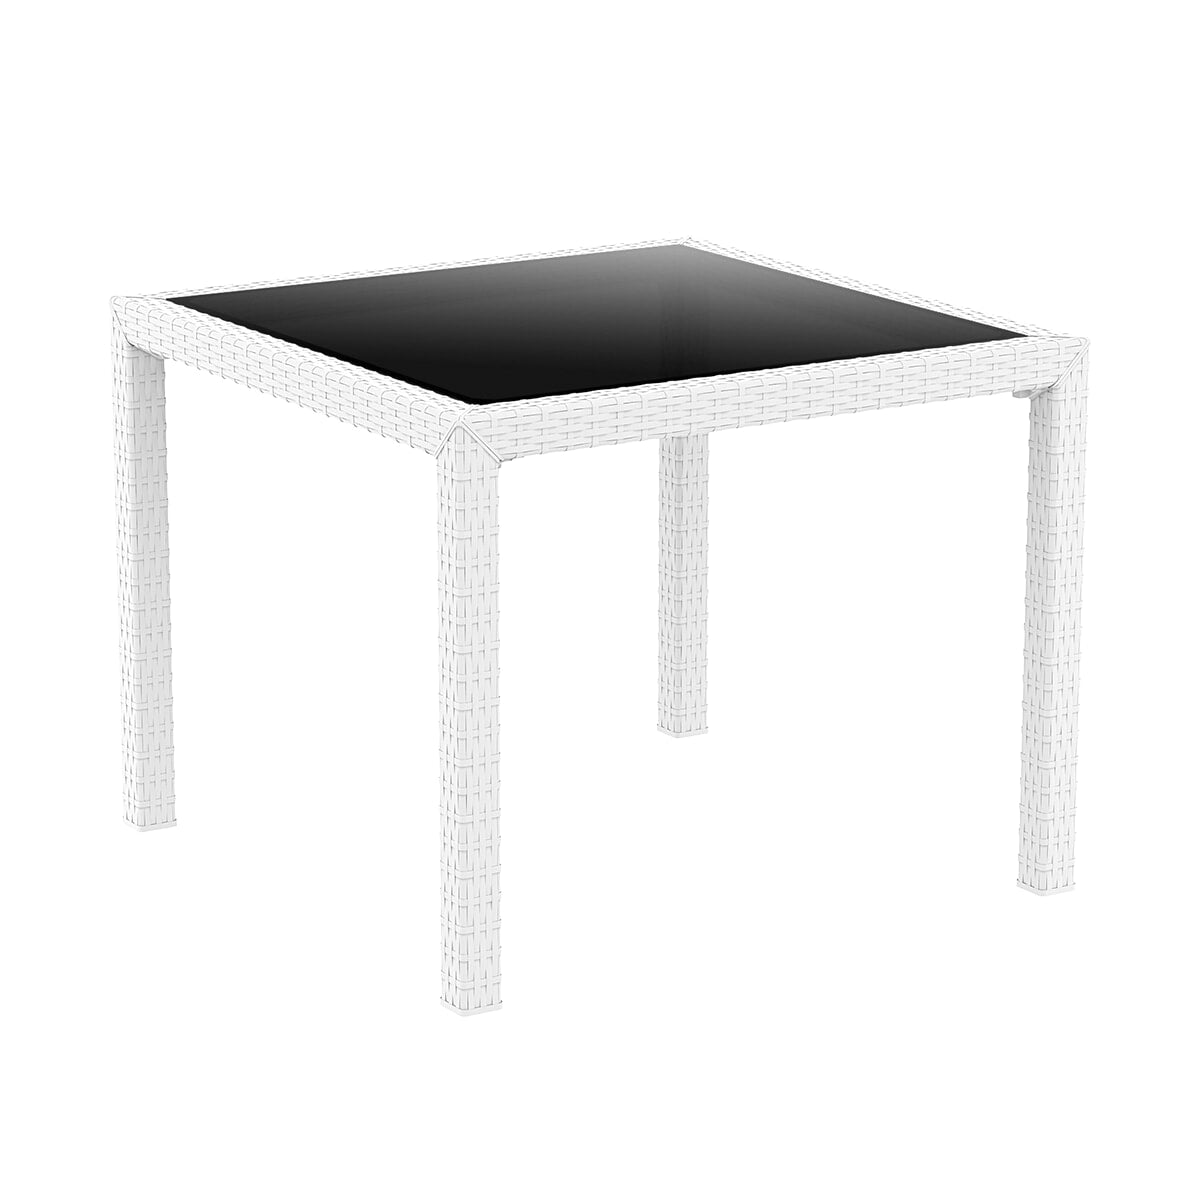 Garbar Atlantic Square table indoors, outdoors 94x94 White